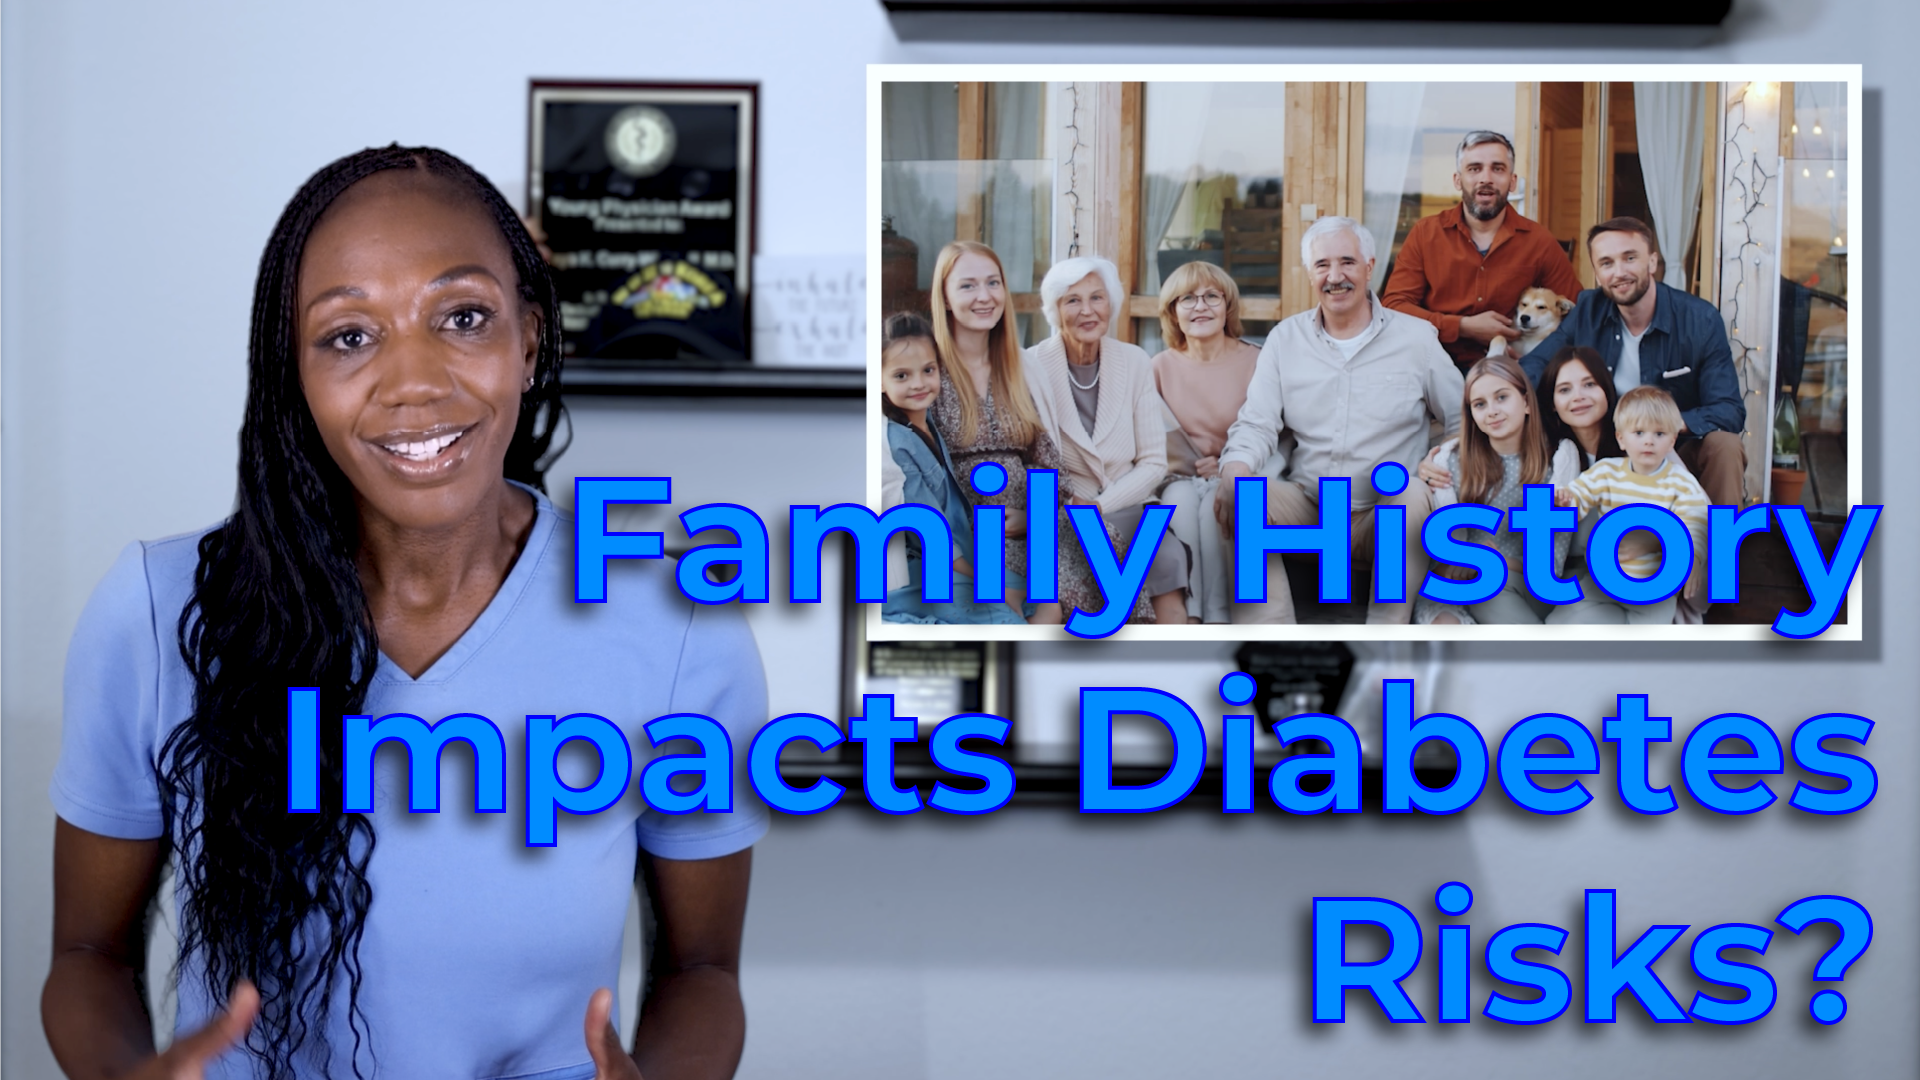 Diabetes and Family History, Dr. BCW, beyond clinical walls